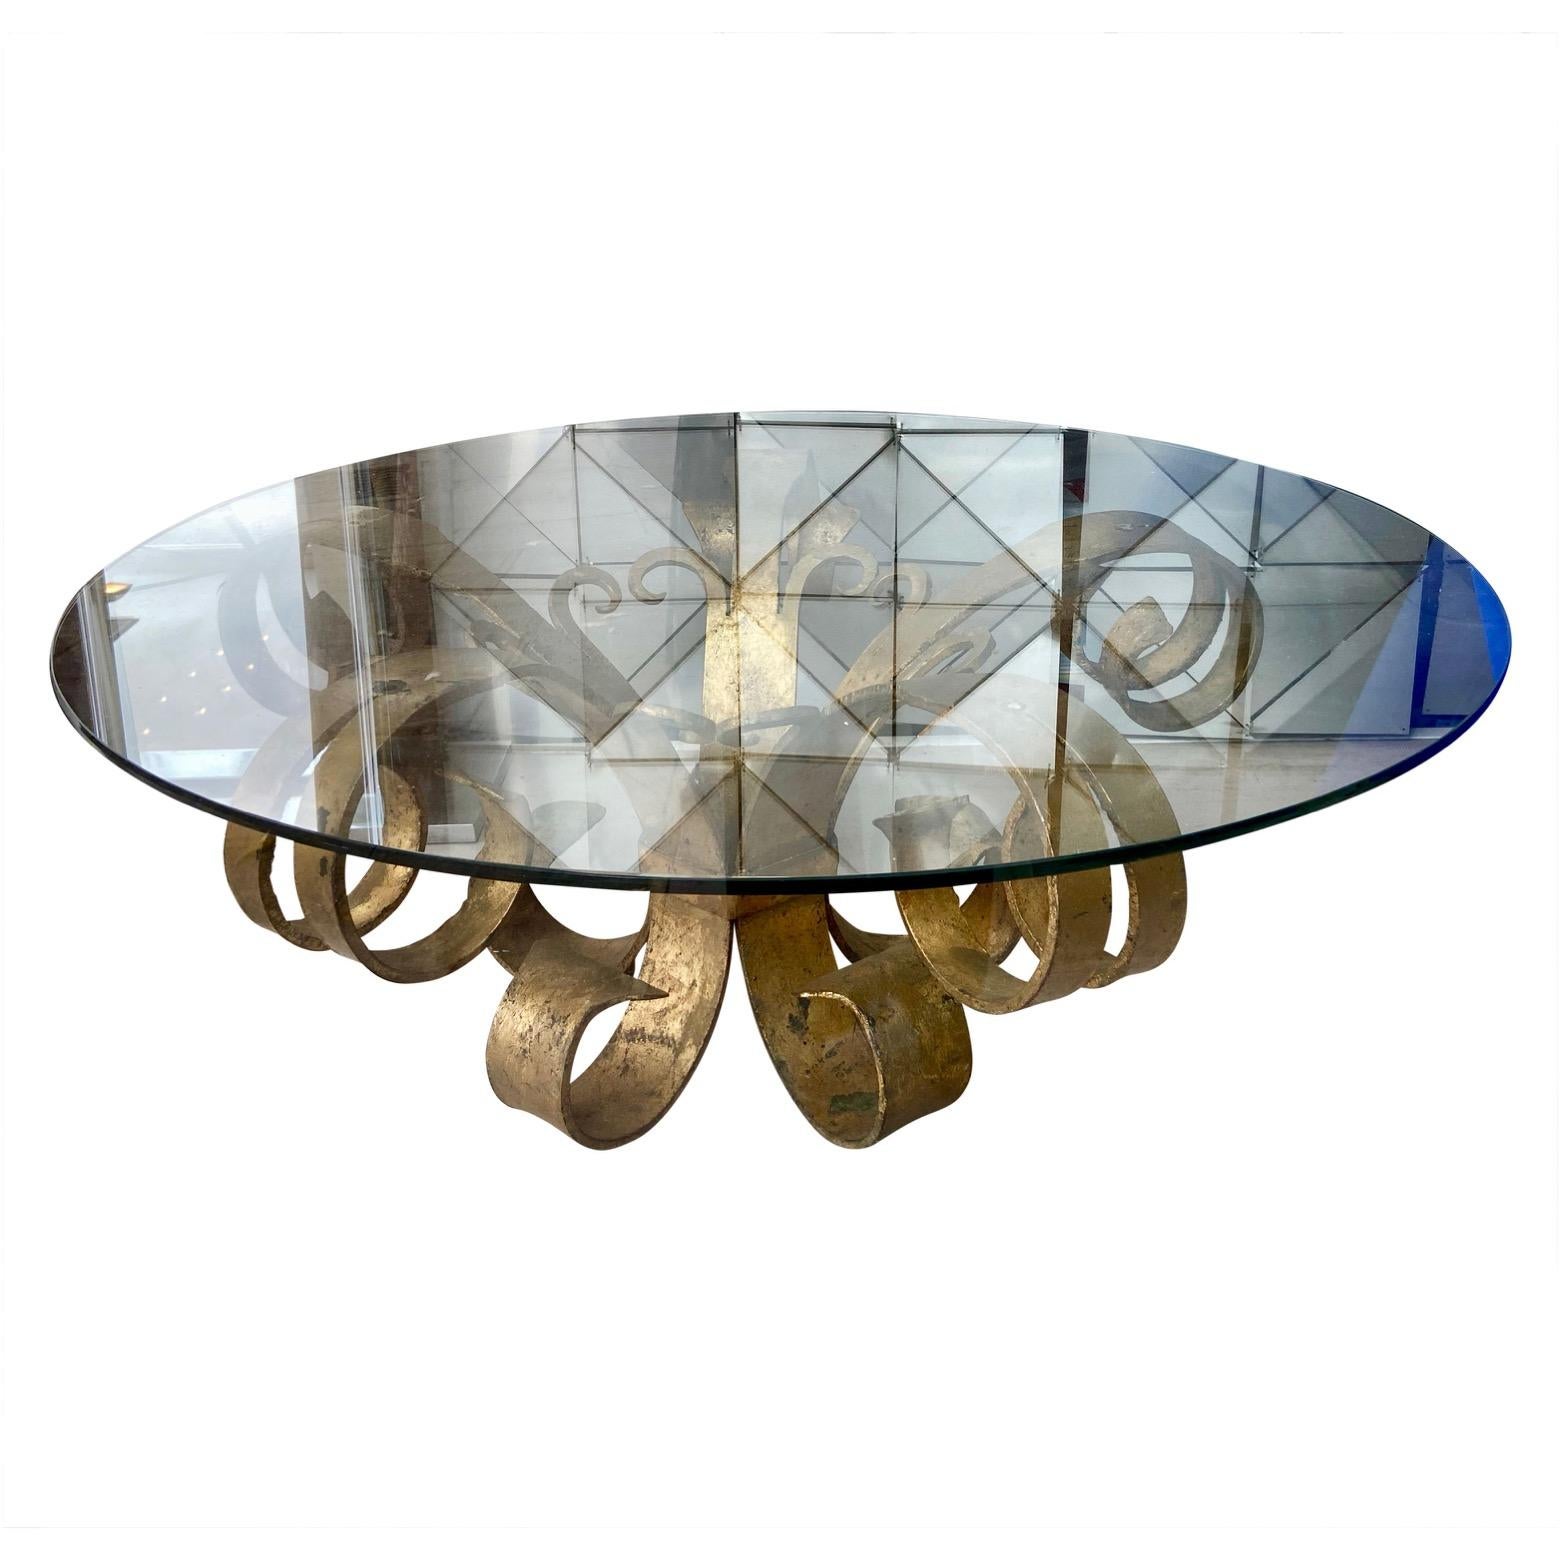 A heavy Hollywood Regency gilded wrought iron coffee table base, Italy or France, circa 1950's.
This base would take a circular glass top of between 80 and 100cm diameter.
We are selling the base separately, in order to give our customers the